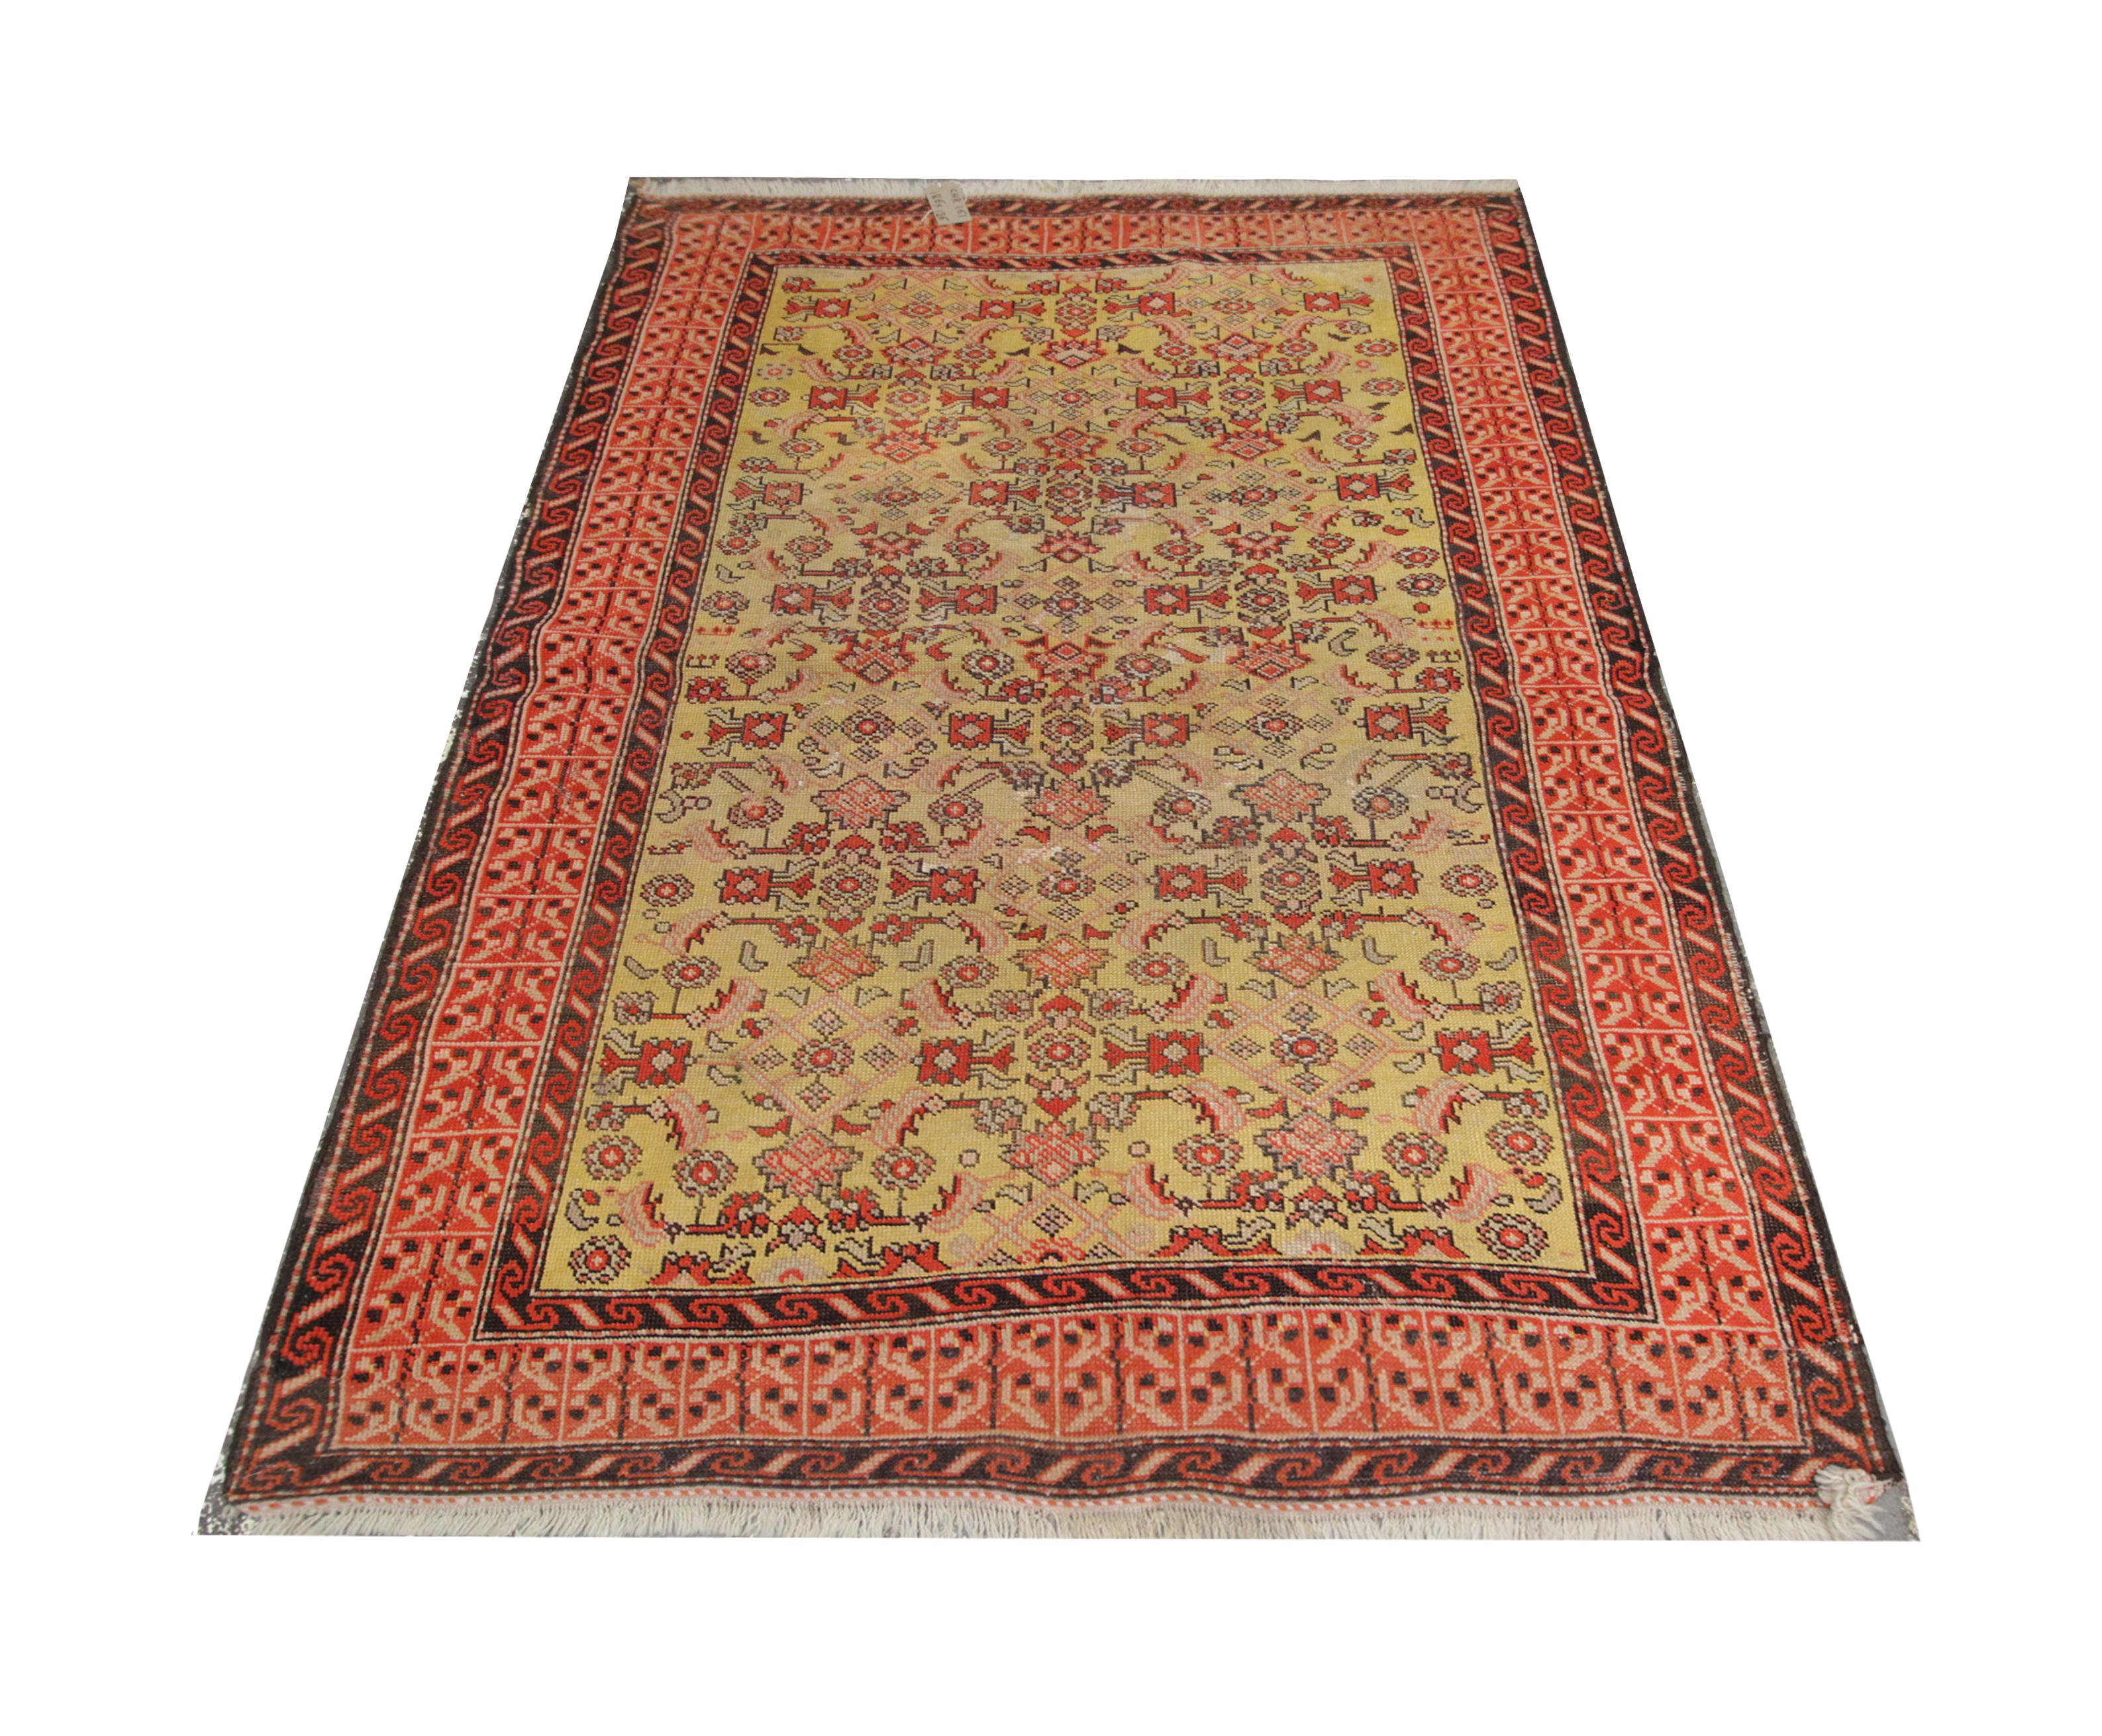 Yellow and red have been woven into a highly-detailed design in this antique rug Caucasian area rug, hand-woven in Azerbaijan in 1940. The Karabagh rug features a stunning central design woven on a yellow background with floral patterns in a